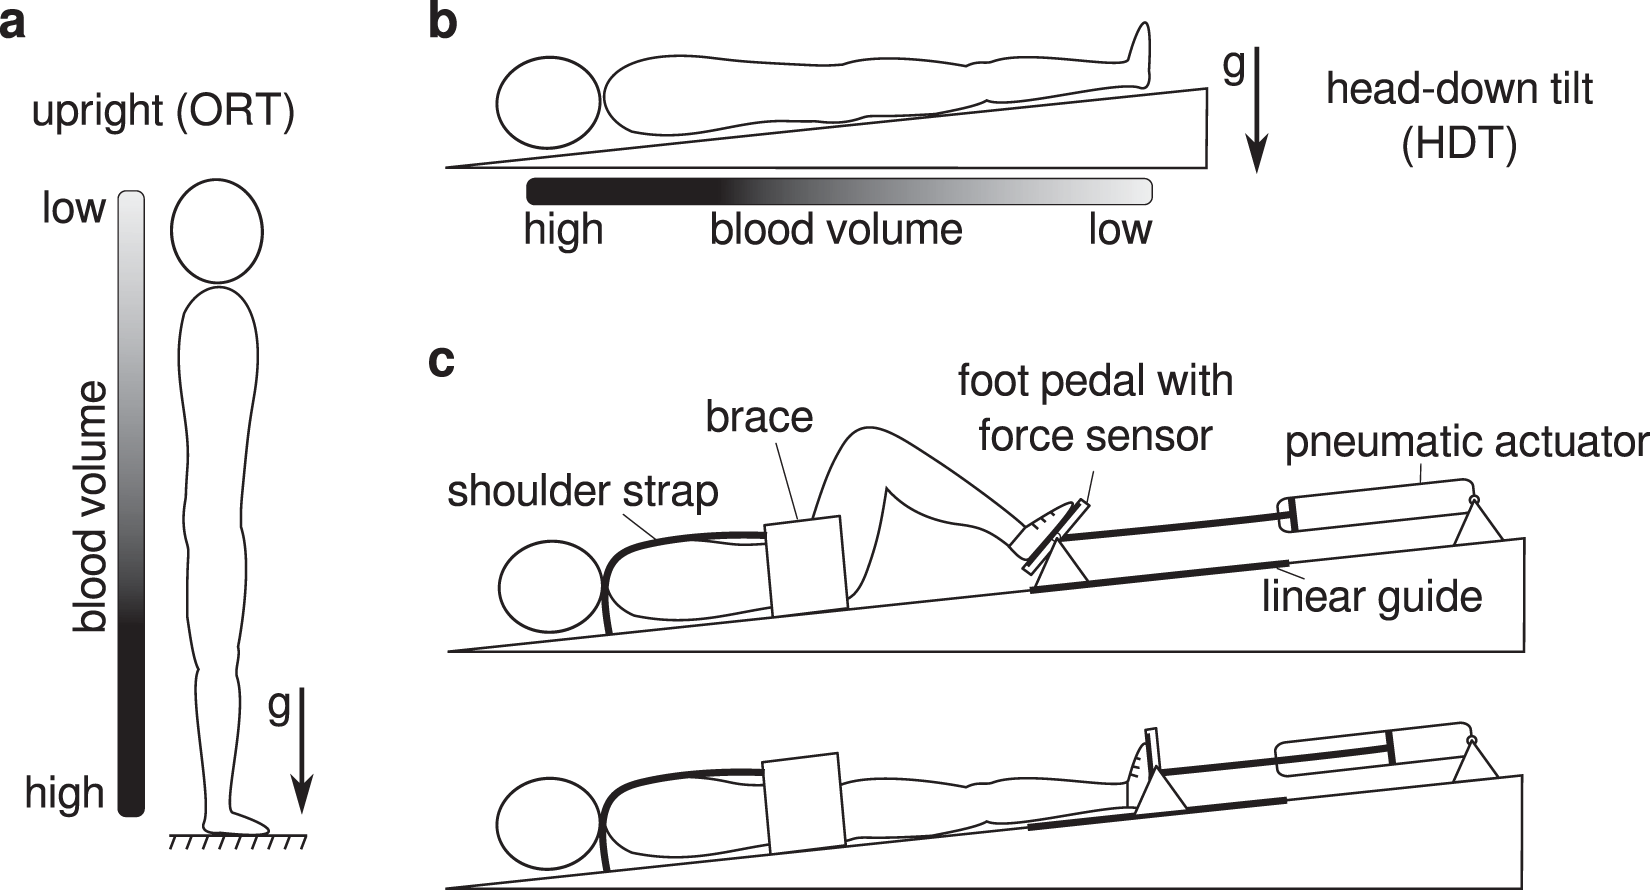 Cardiovascular responses to leg muscle loading during head-down tilt at  rest and after dynamic exercises | Scientific Reports